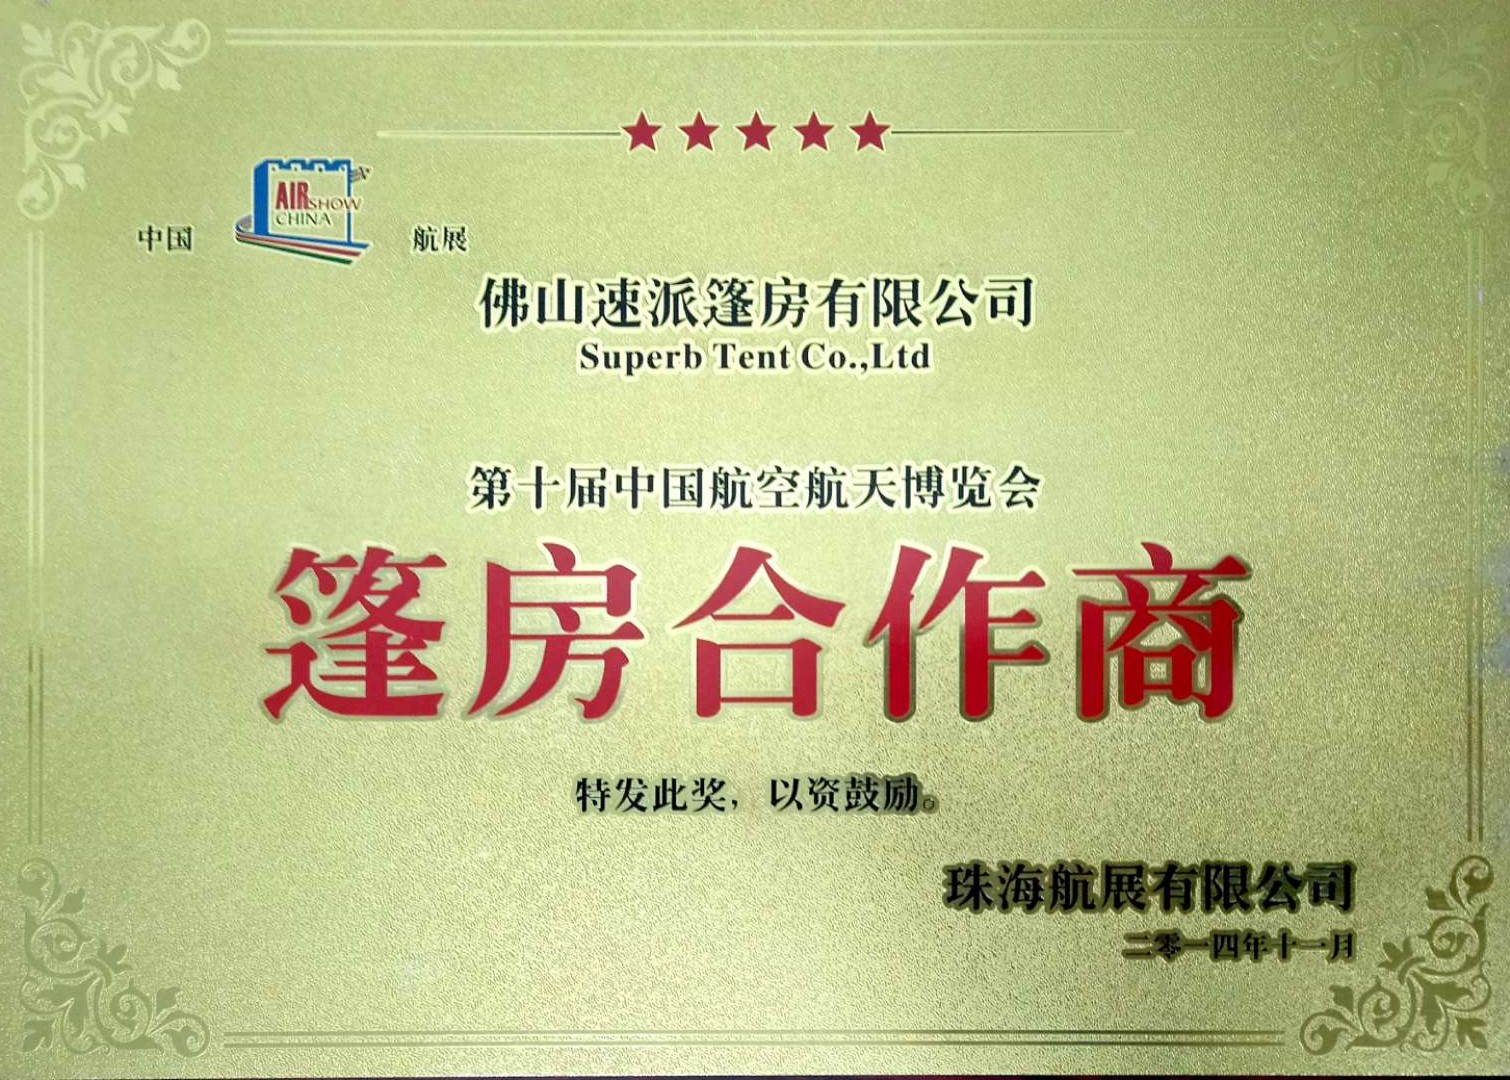 China Aviation Expo Cooperation Certificate